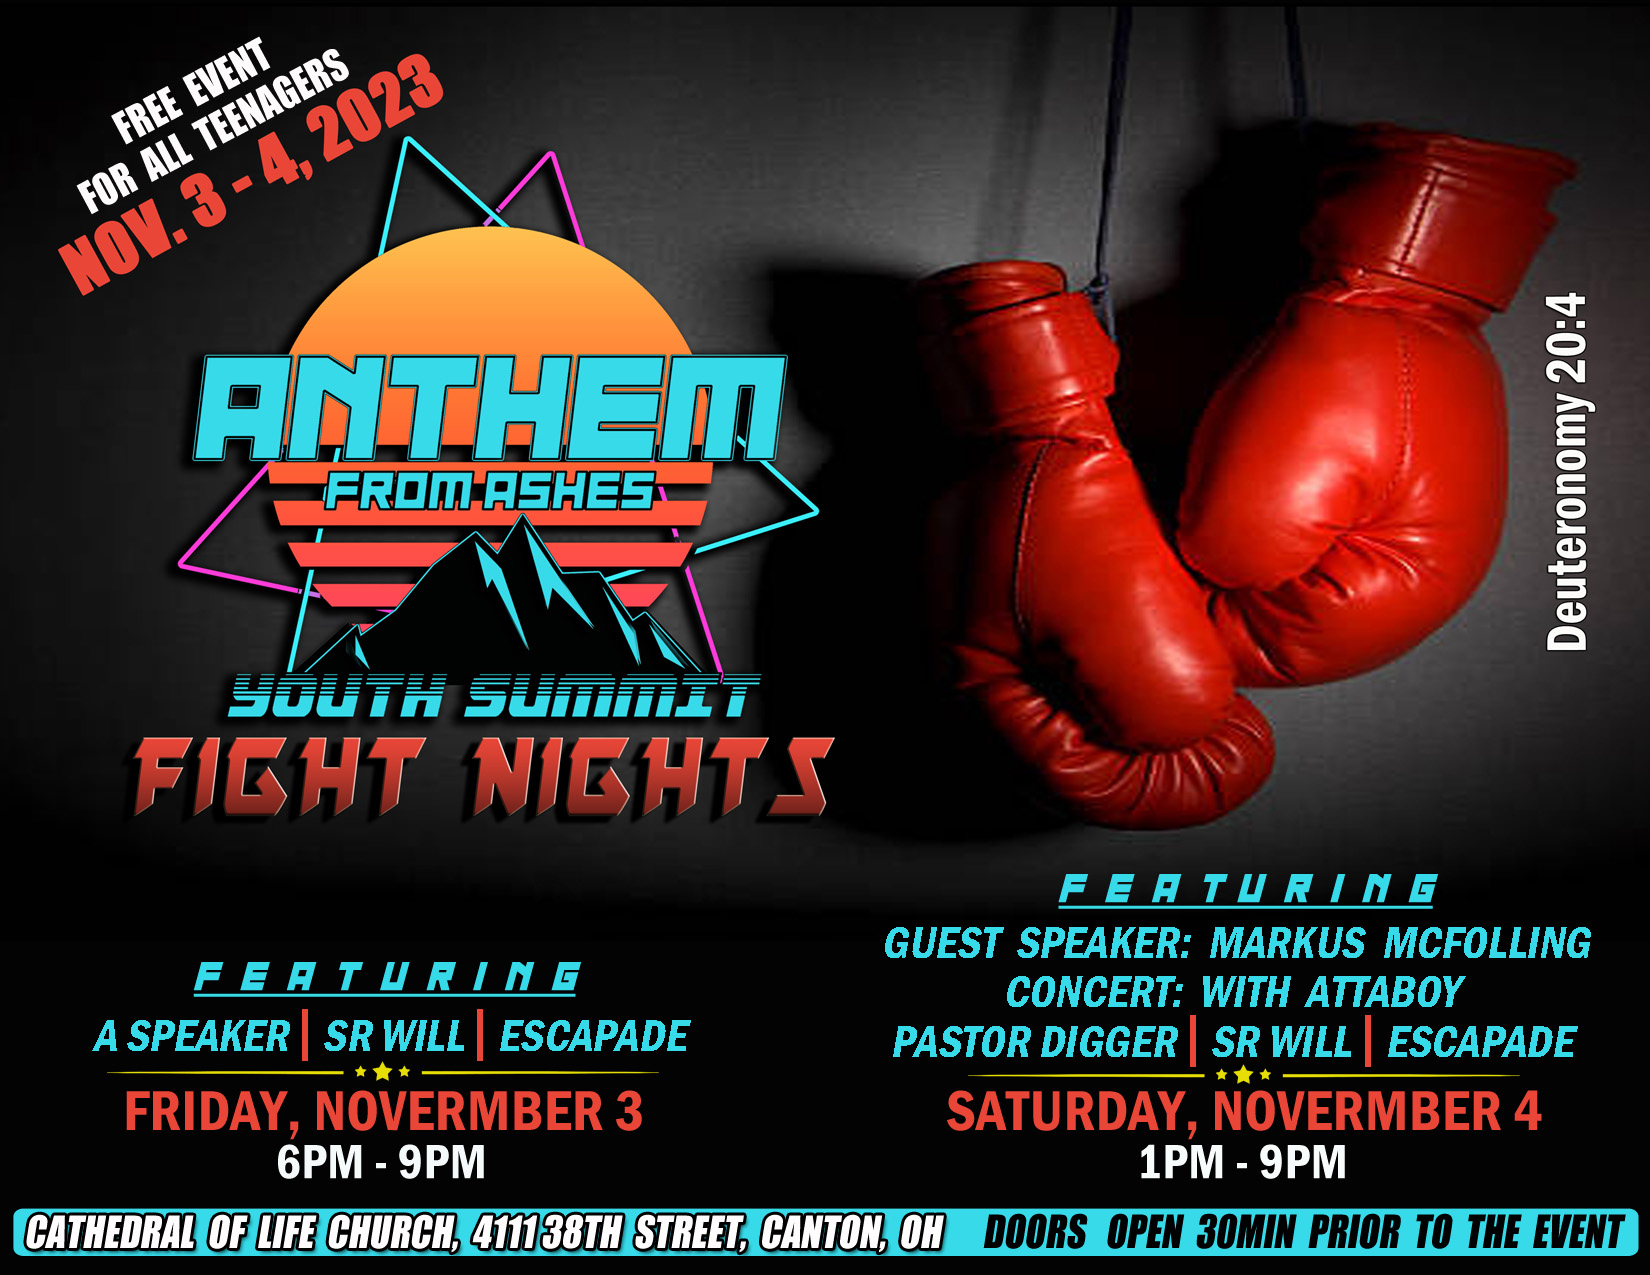 An informational poster regarding the anthem from ashes youth event, its times, and locations!